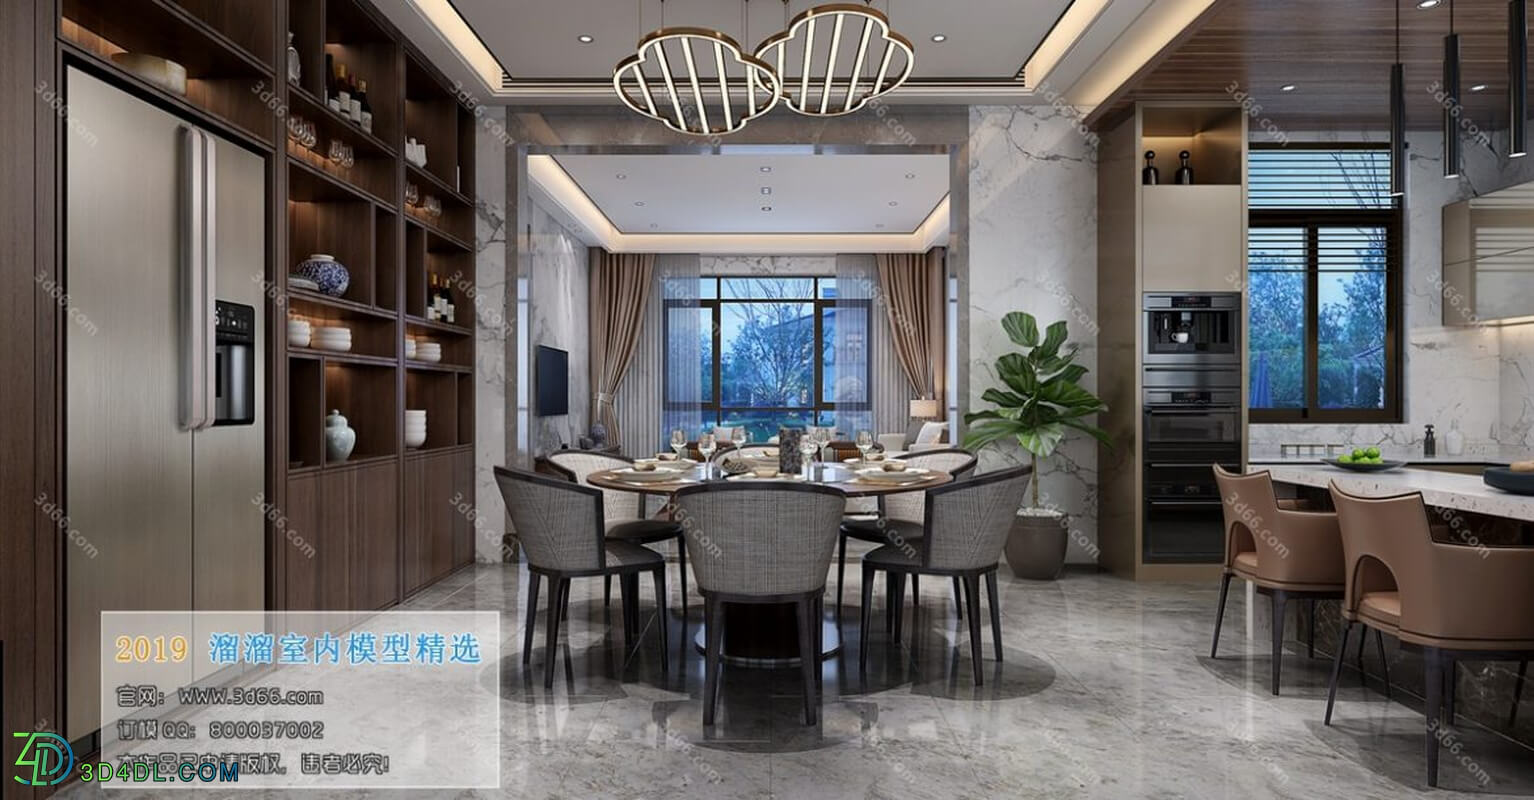 3D66 2019 Dining Room & Kitchen (001)